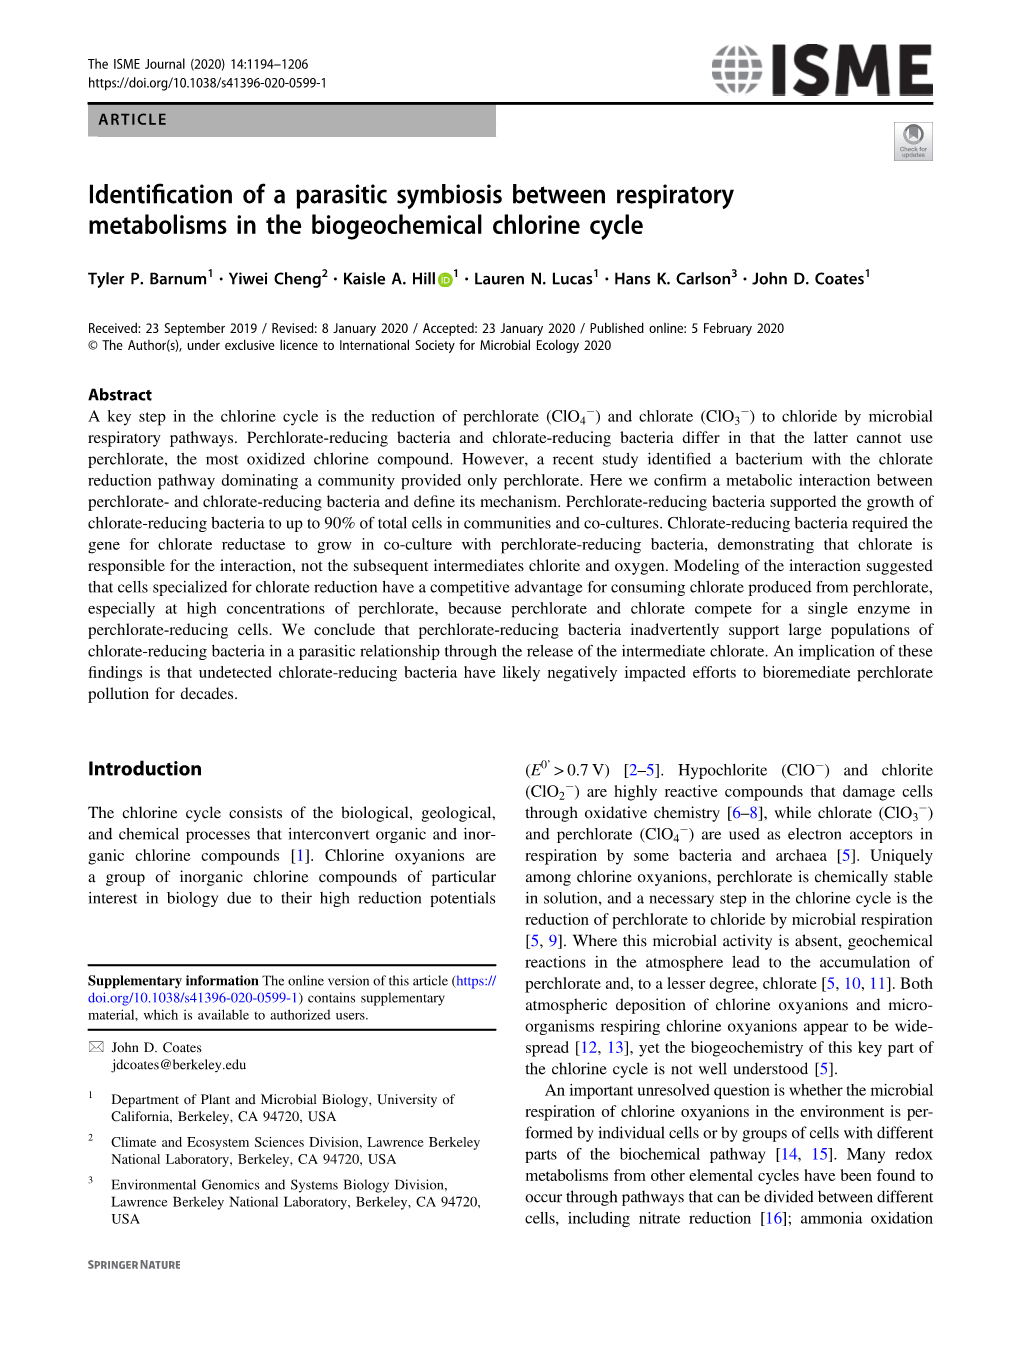 Identification of a Parasitic Symbiosis Between Respiratory Metabolisms In